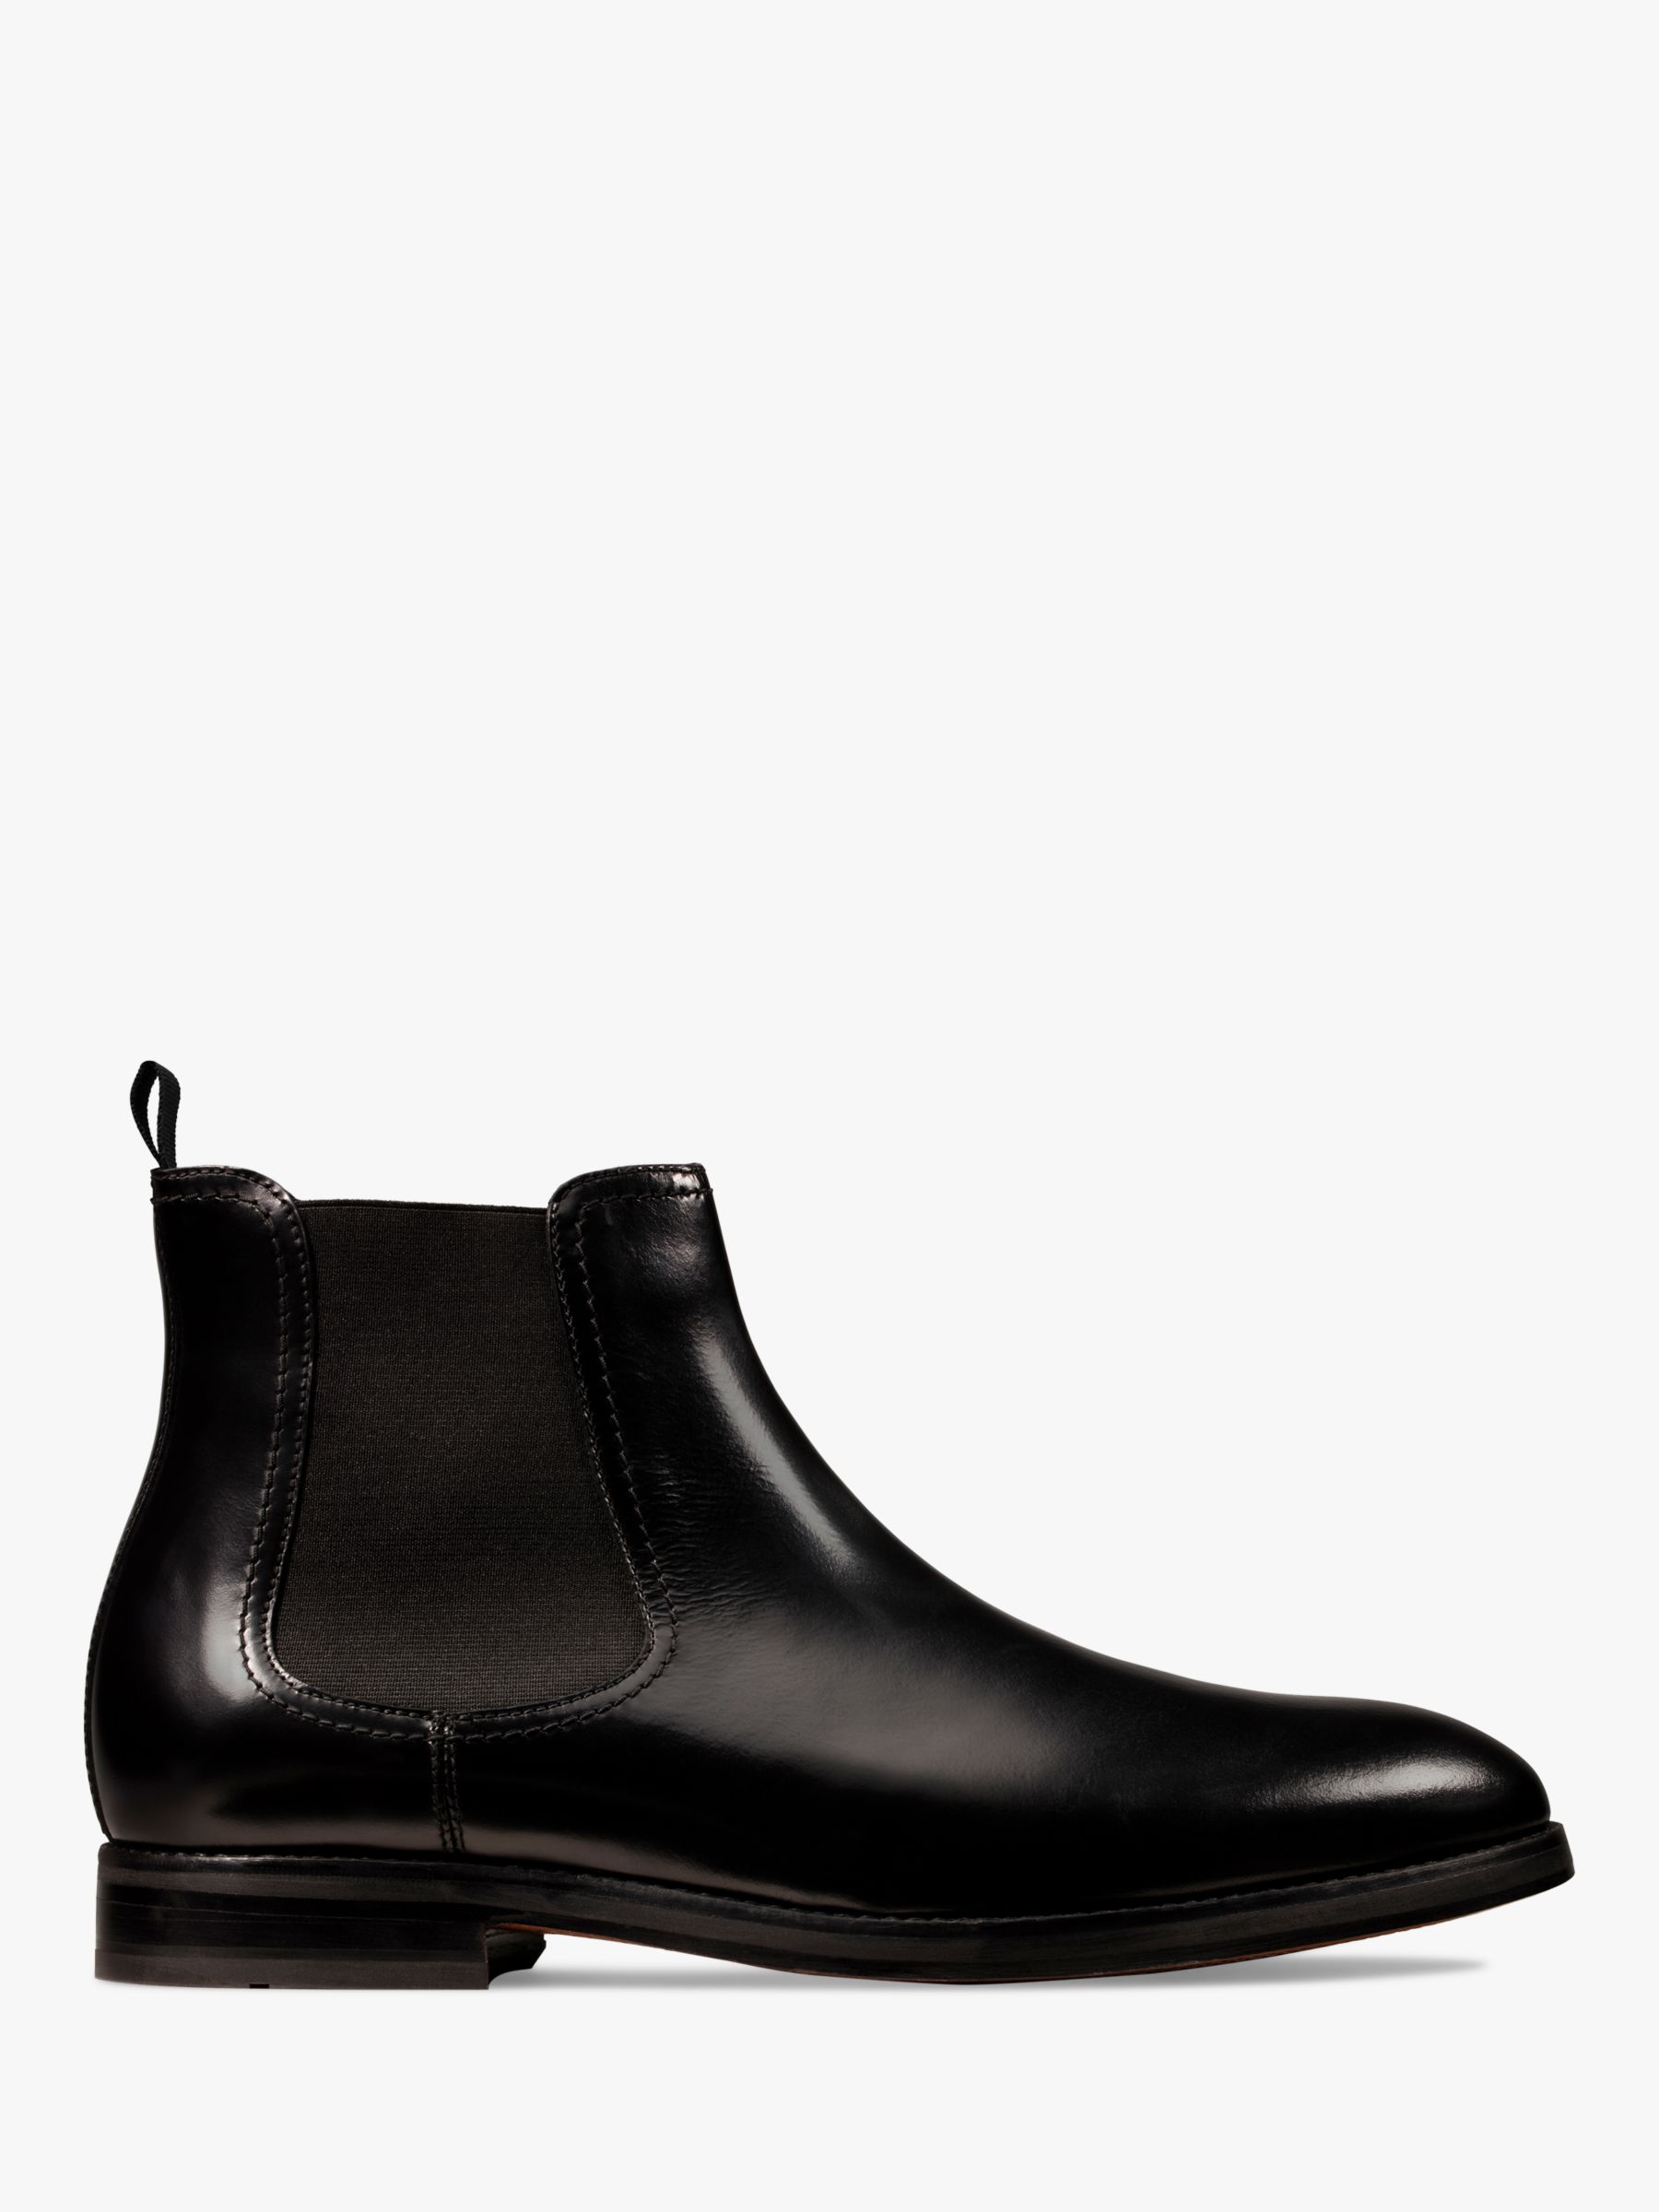 Clarks Oliver Top Chelsea Boots at John Lewis & Partners